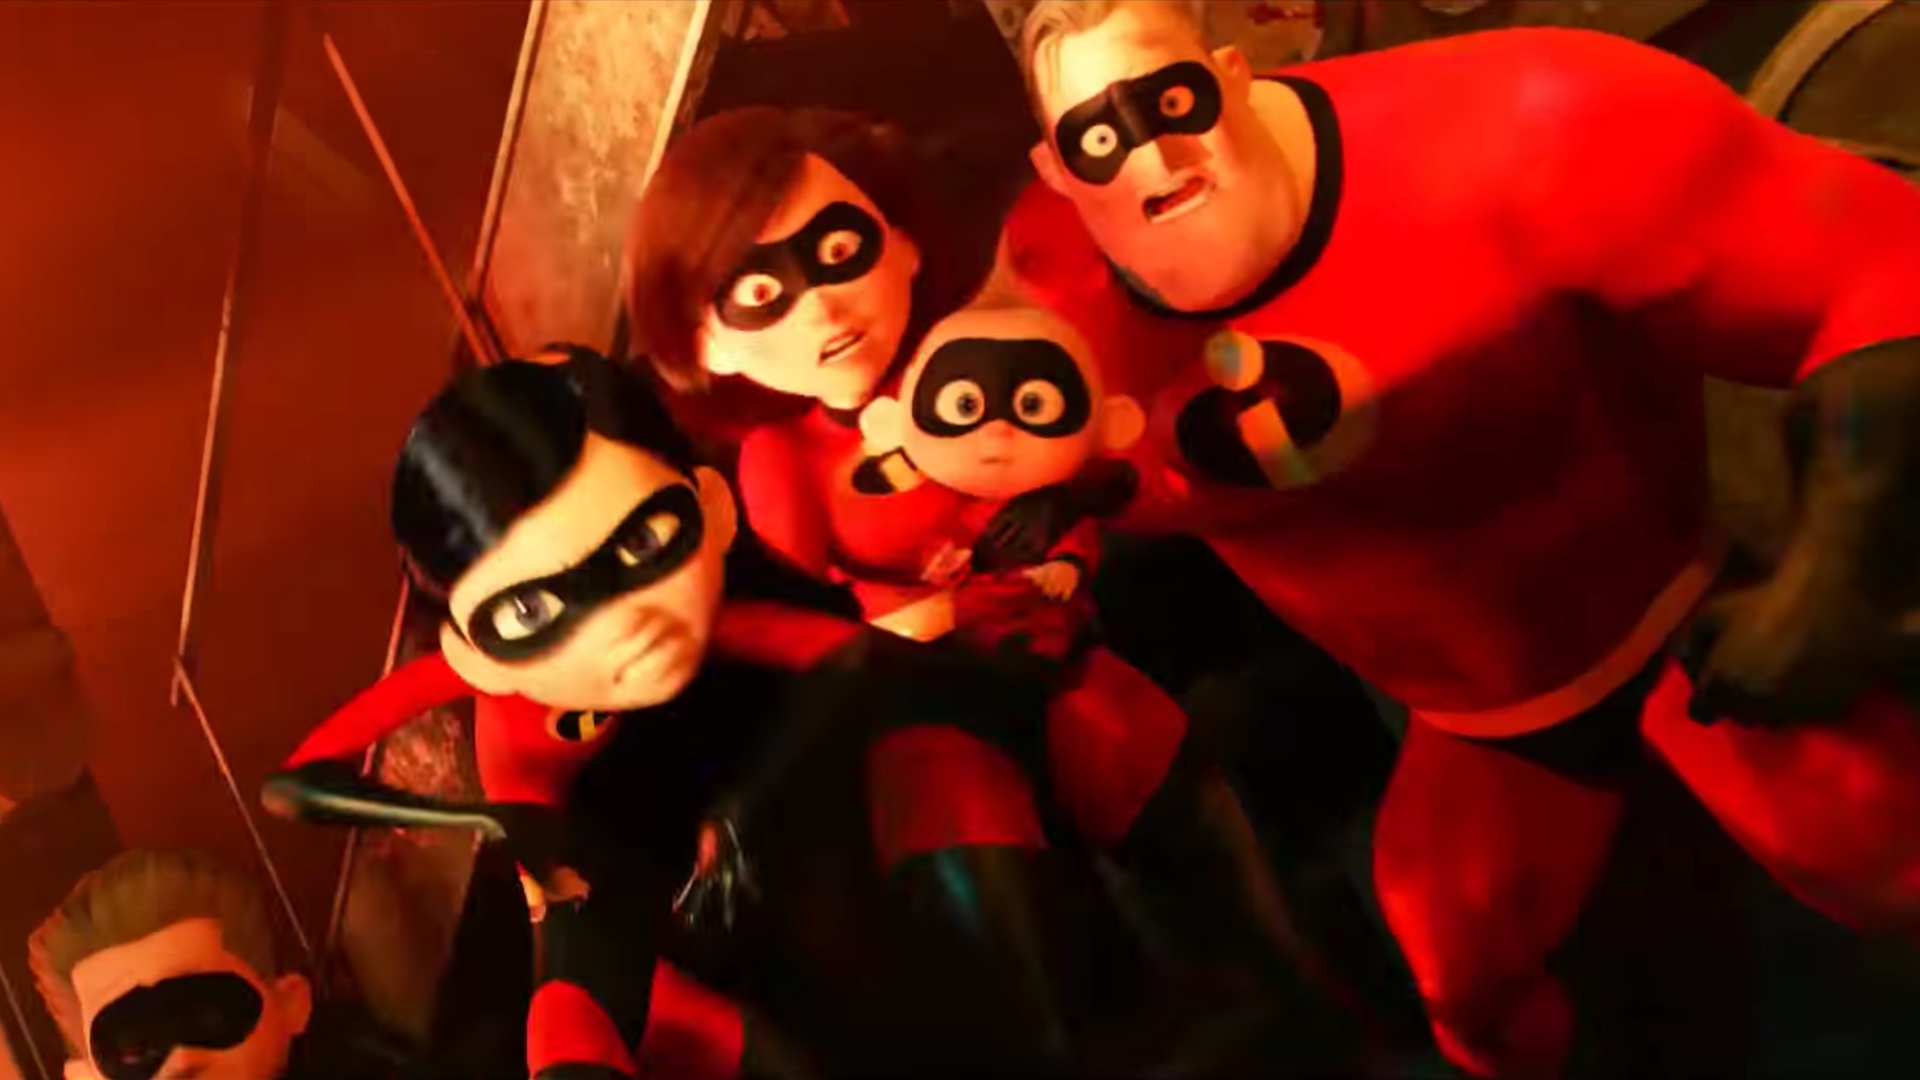 This New Japanese Trailer For Incredibles 2 Is Packed Full Of Fun And Exciting New Footage